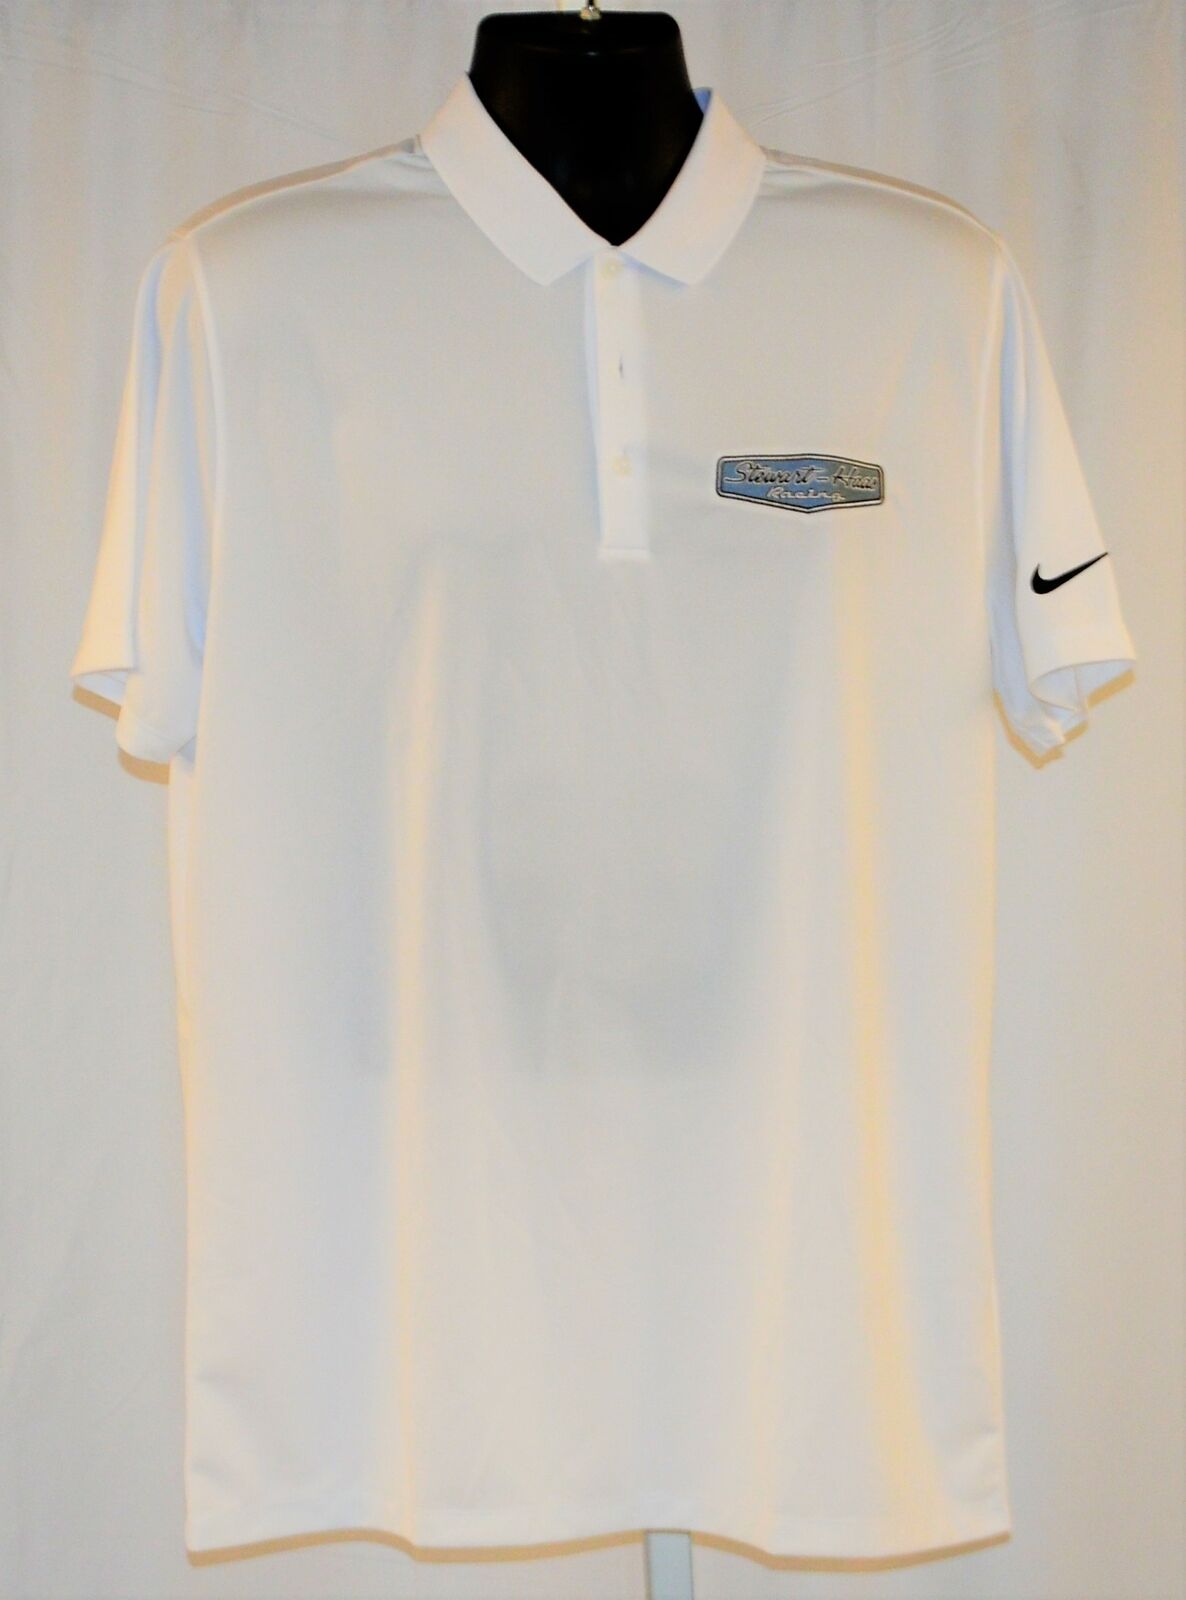 #8 Kevin Harvick Stewart-haas Nascar Team Issued Nike Polo Shirt. New Large